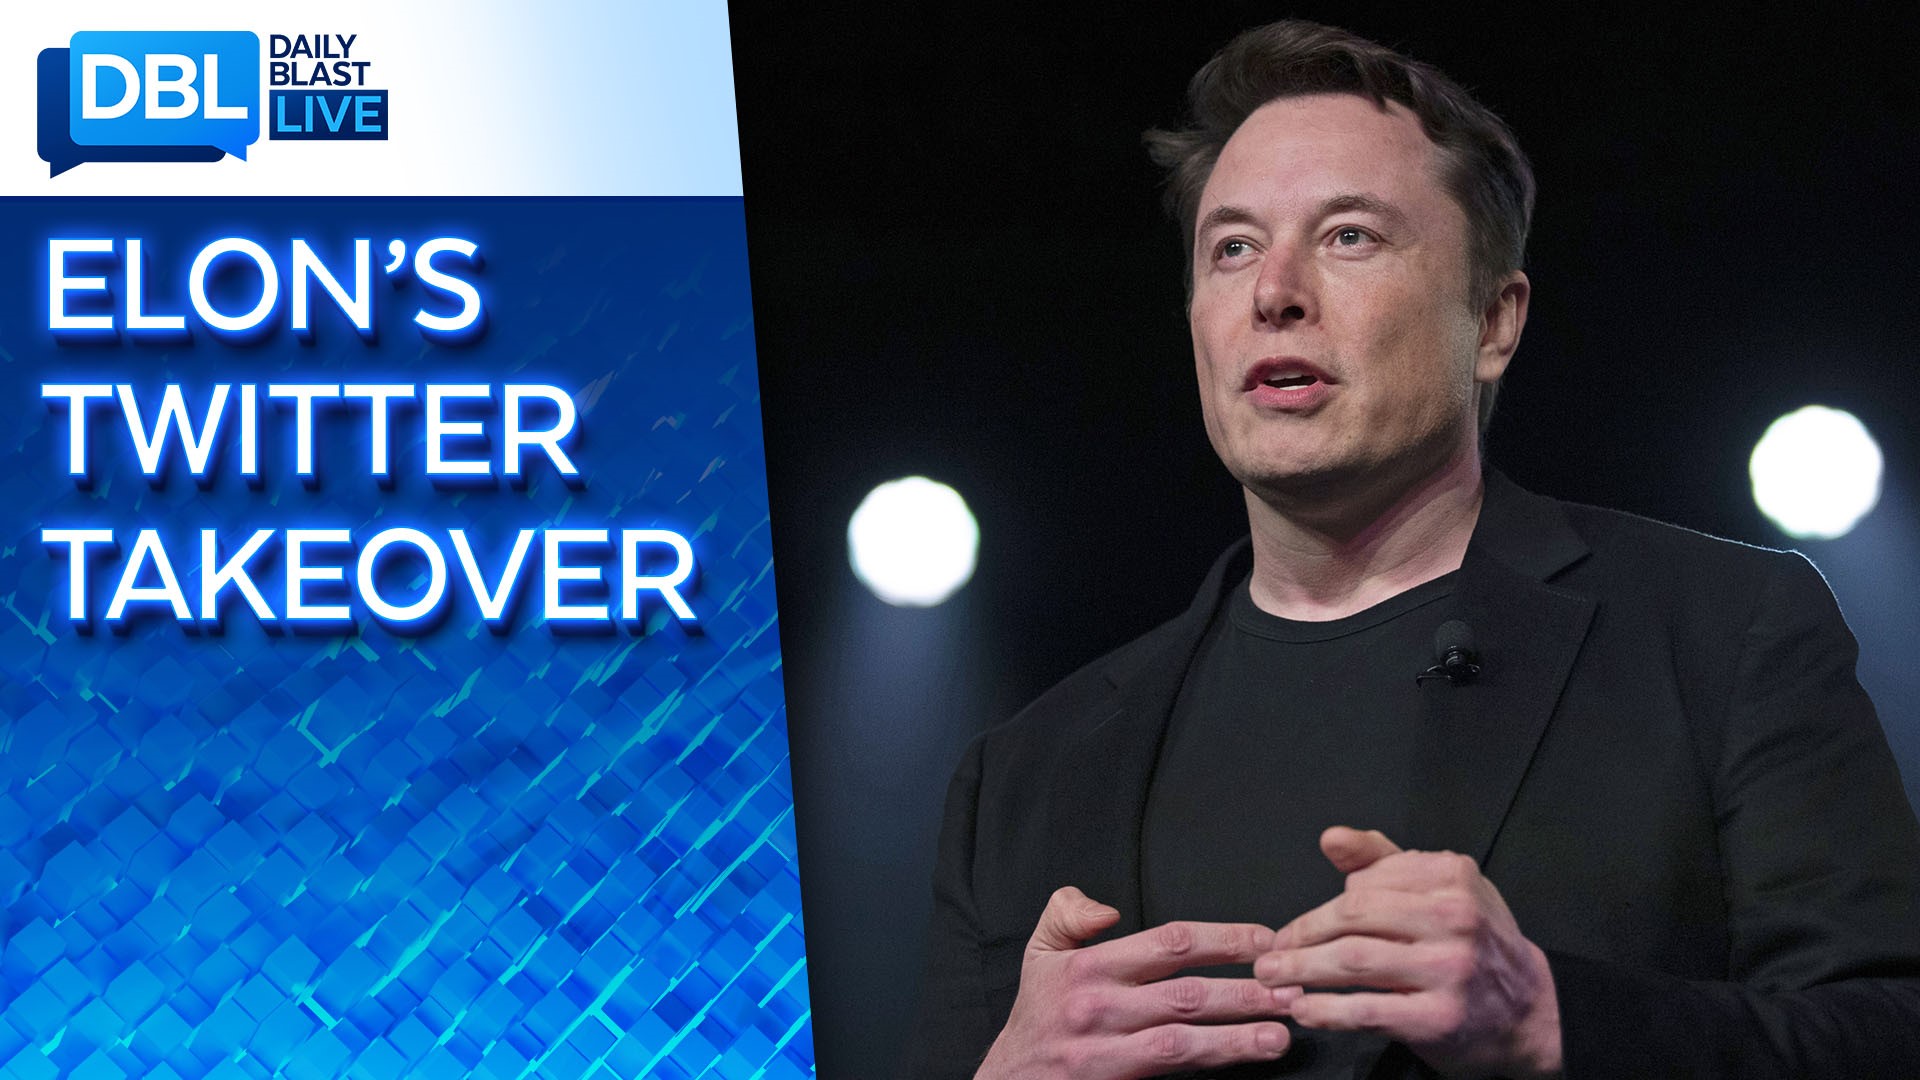 Elon Musk, the world's wealthiest man, purchased Twitter on Monday in a $44 billion deal.